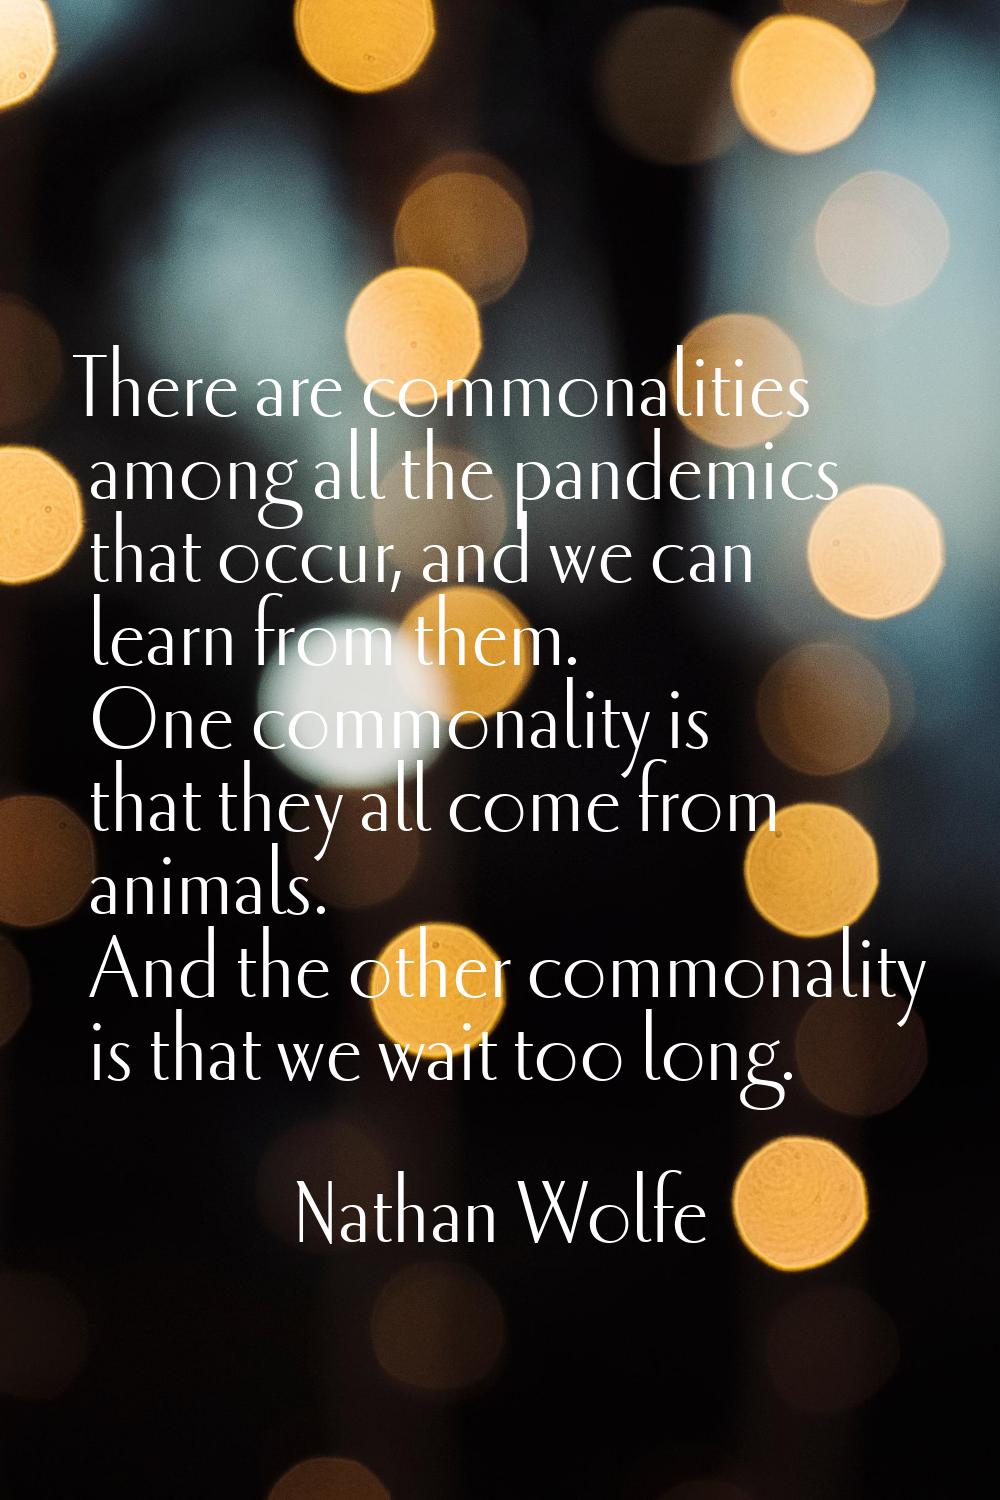 There are commonalities among all the pandemics that occur, and we can learn from them. One commona